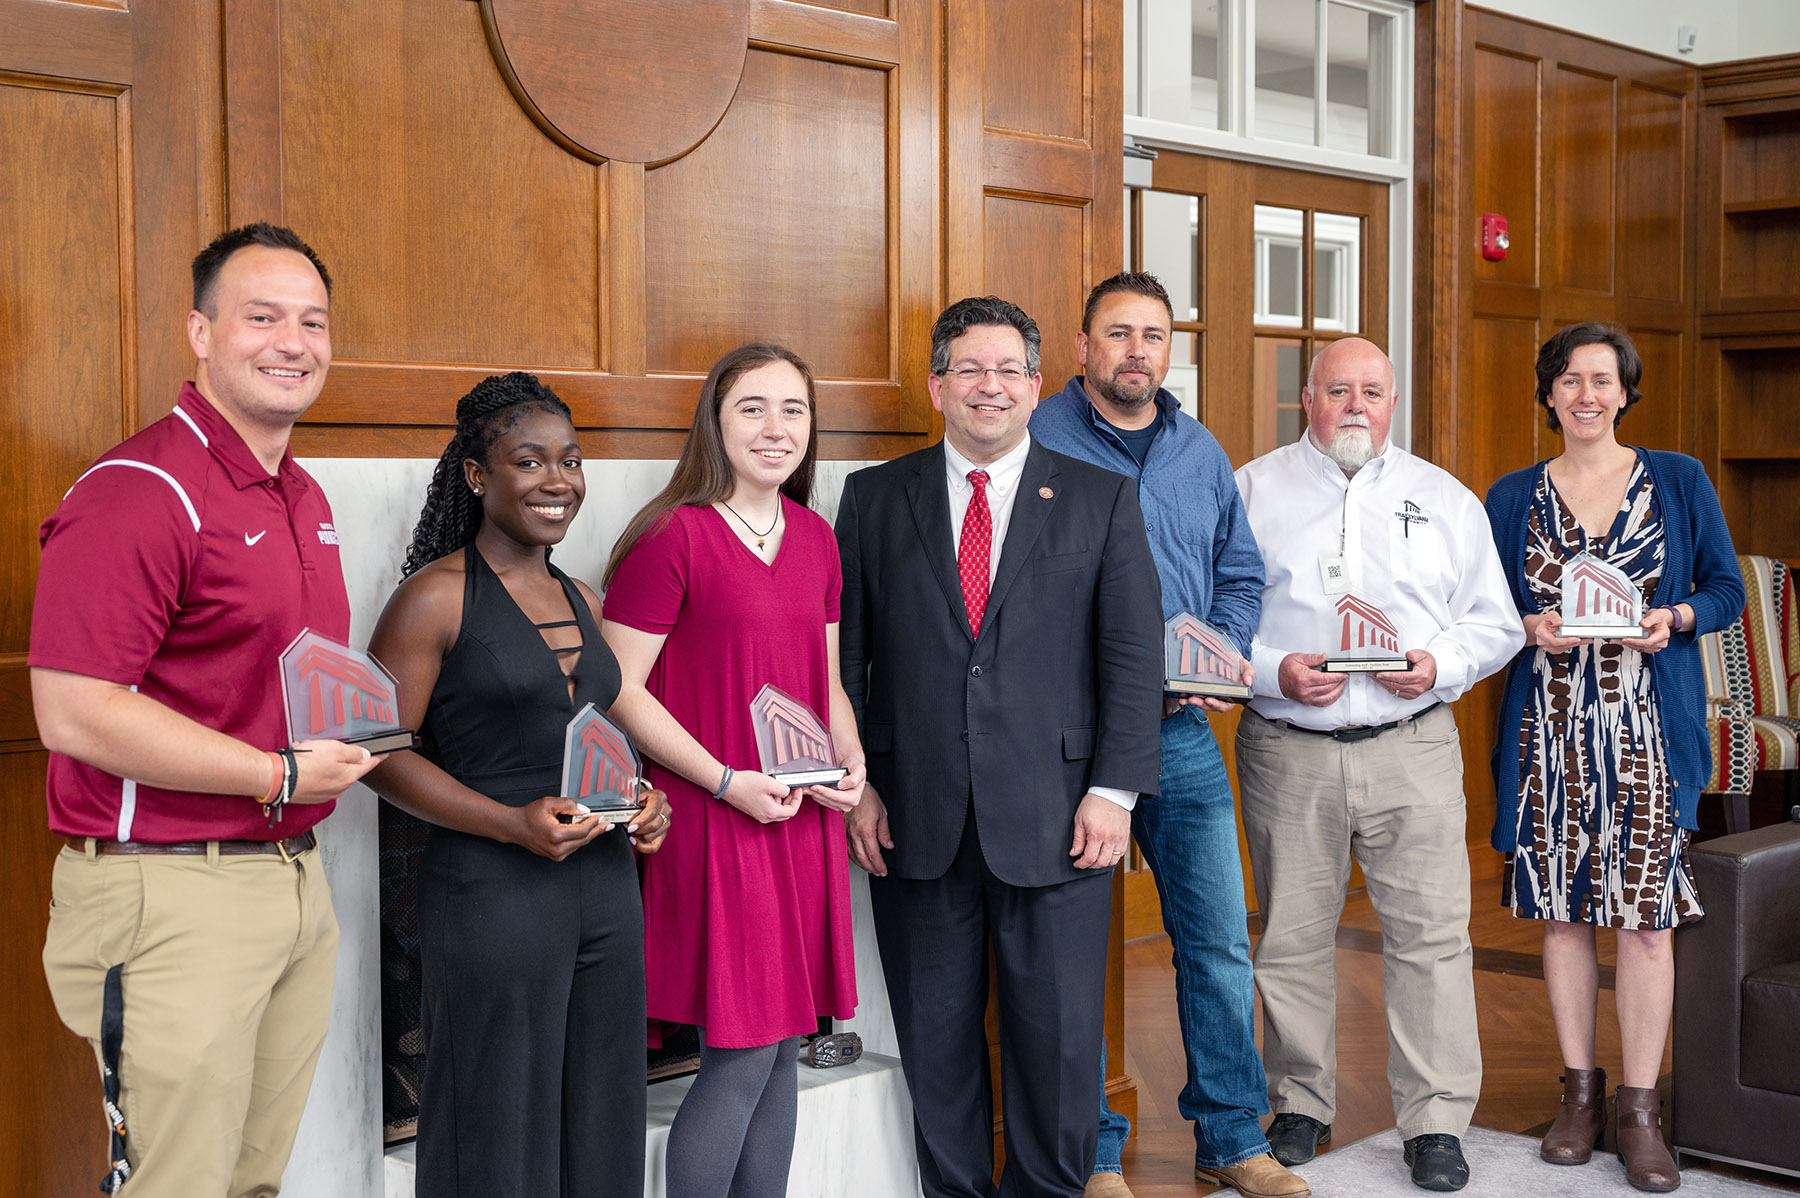 Transylvania students, employees recognized at annual university awards ceremony